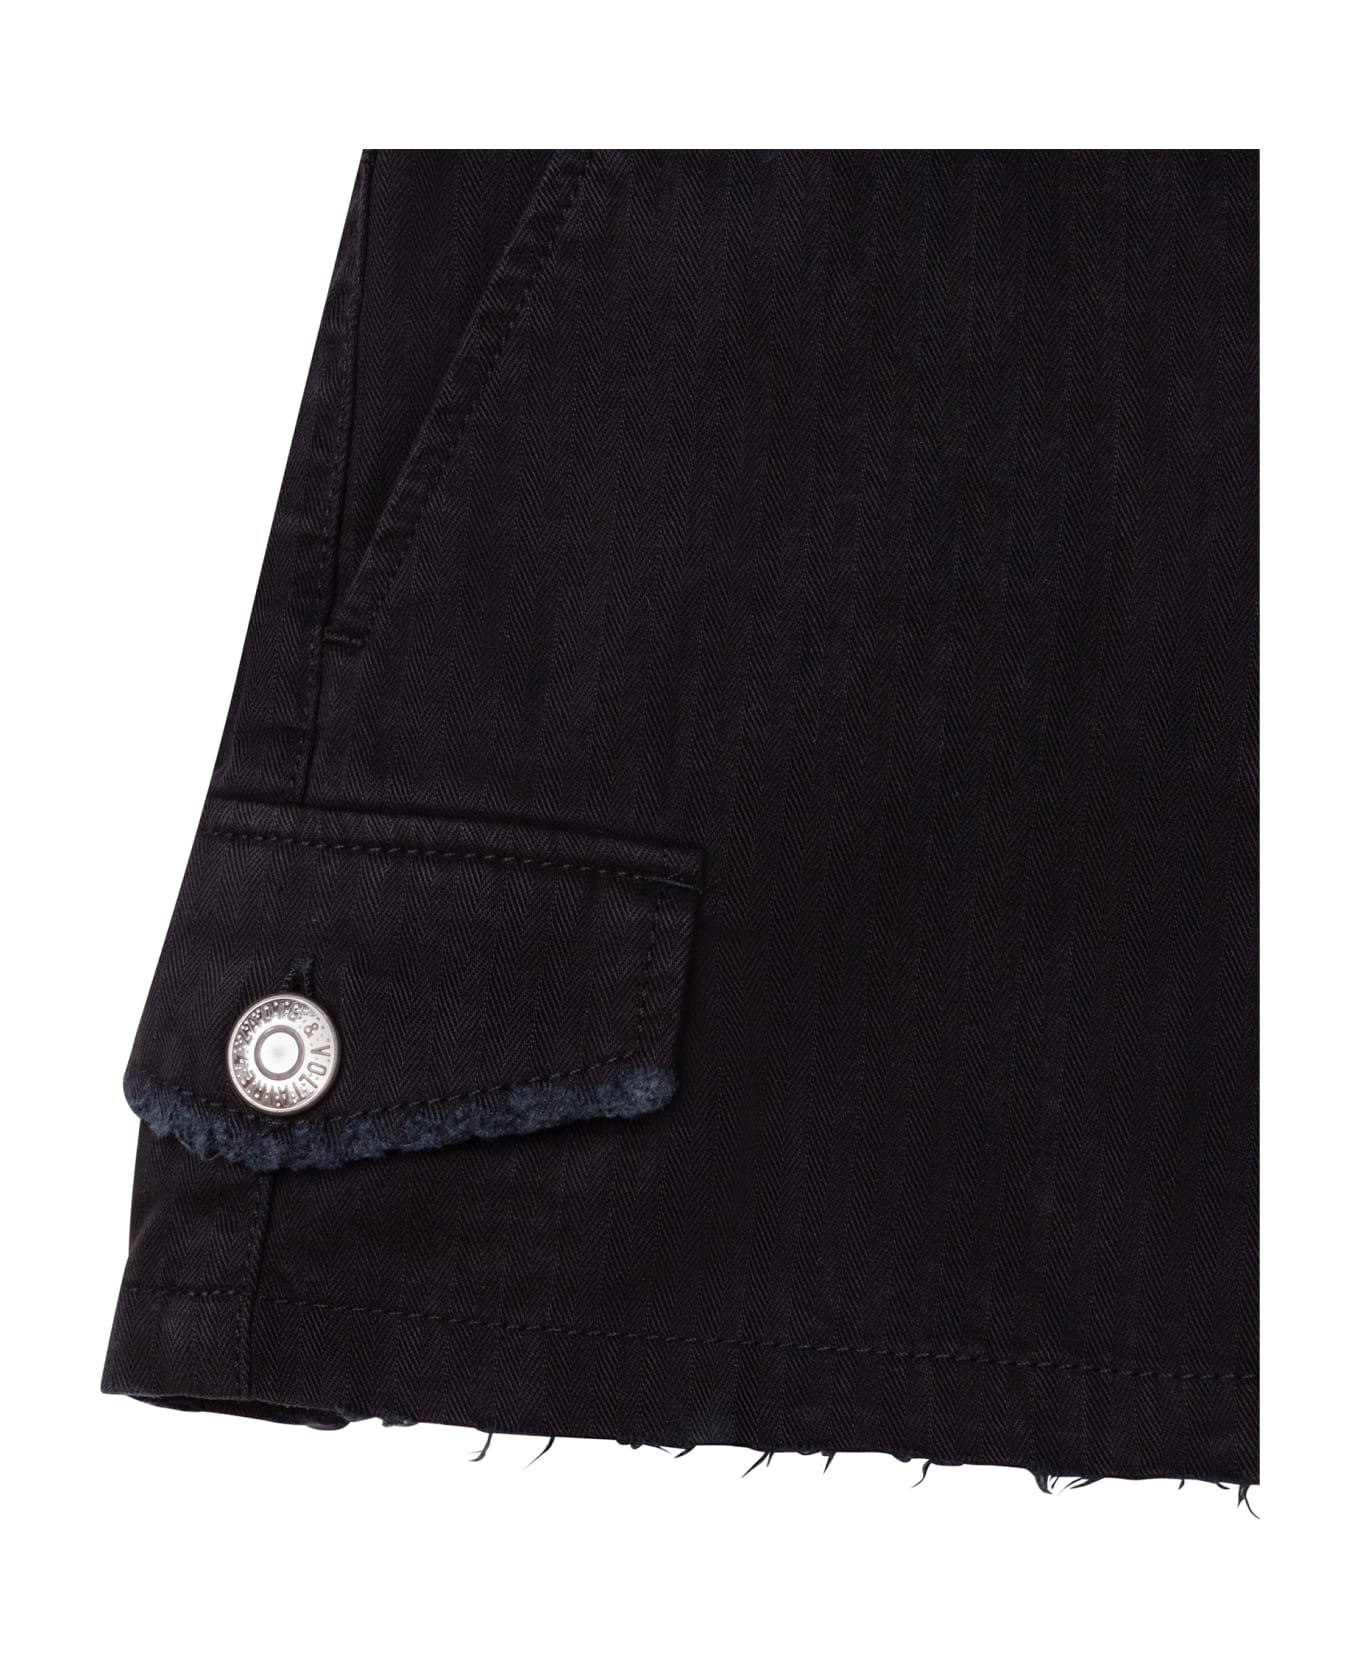 Zadig & Voltaire Shorts With Pockets - Black